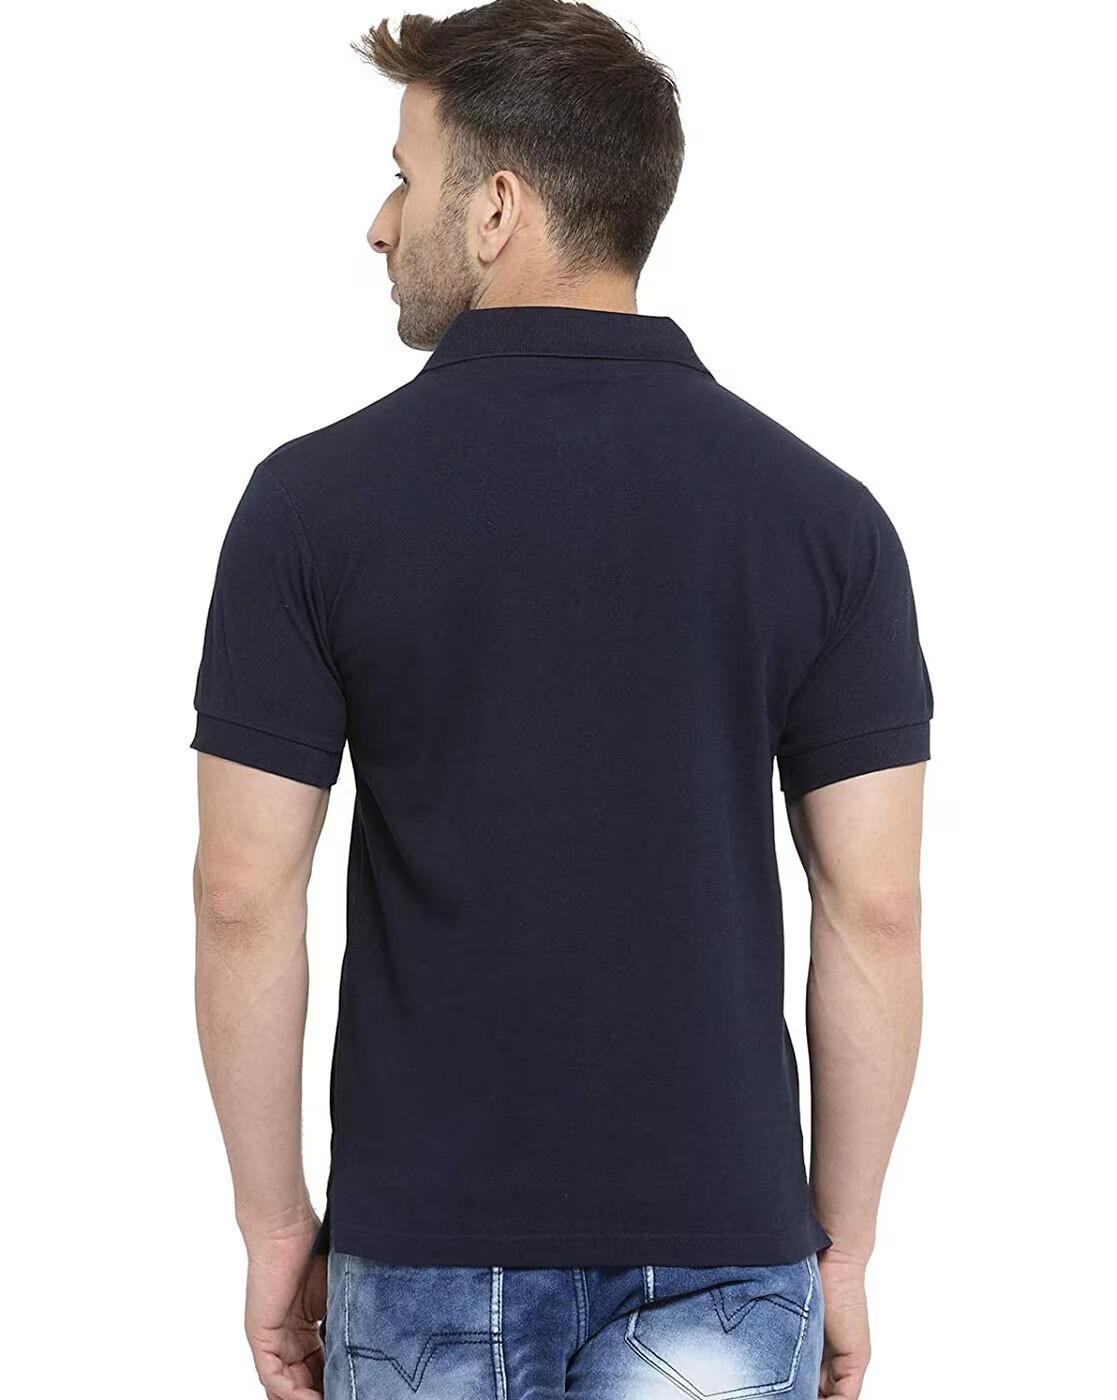 Poly Cotton Solid Half Sleeves Mens Polo T-Shirt